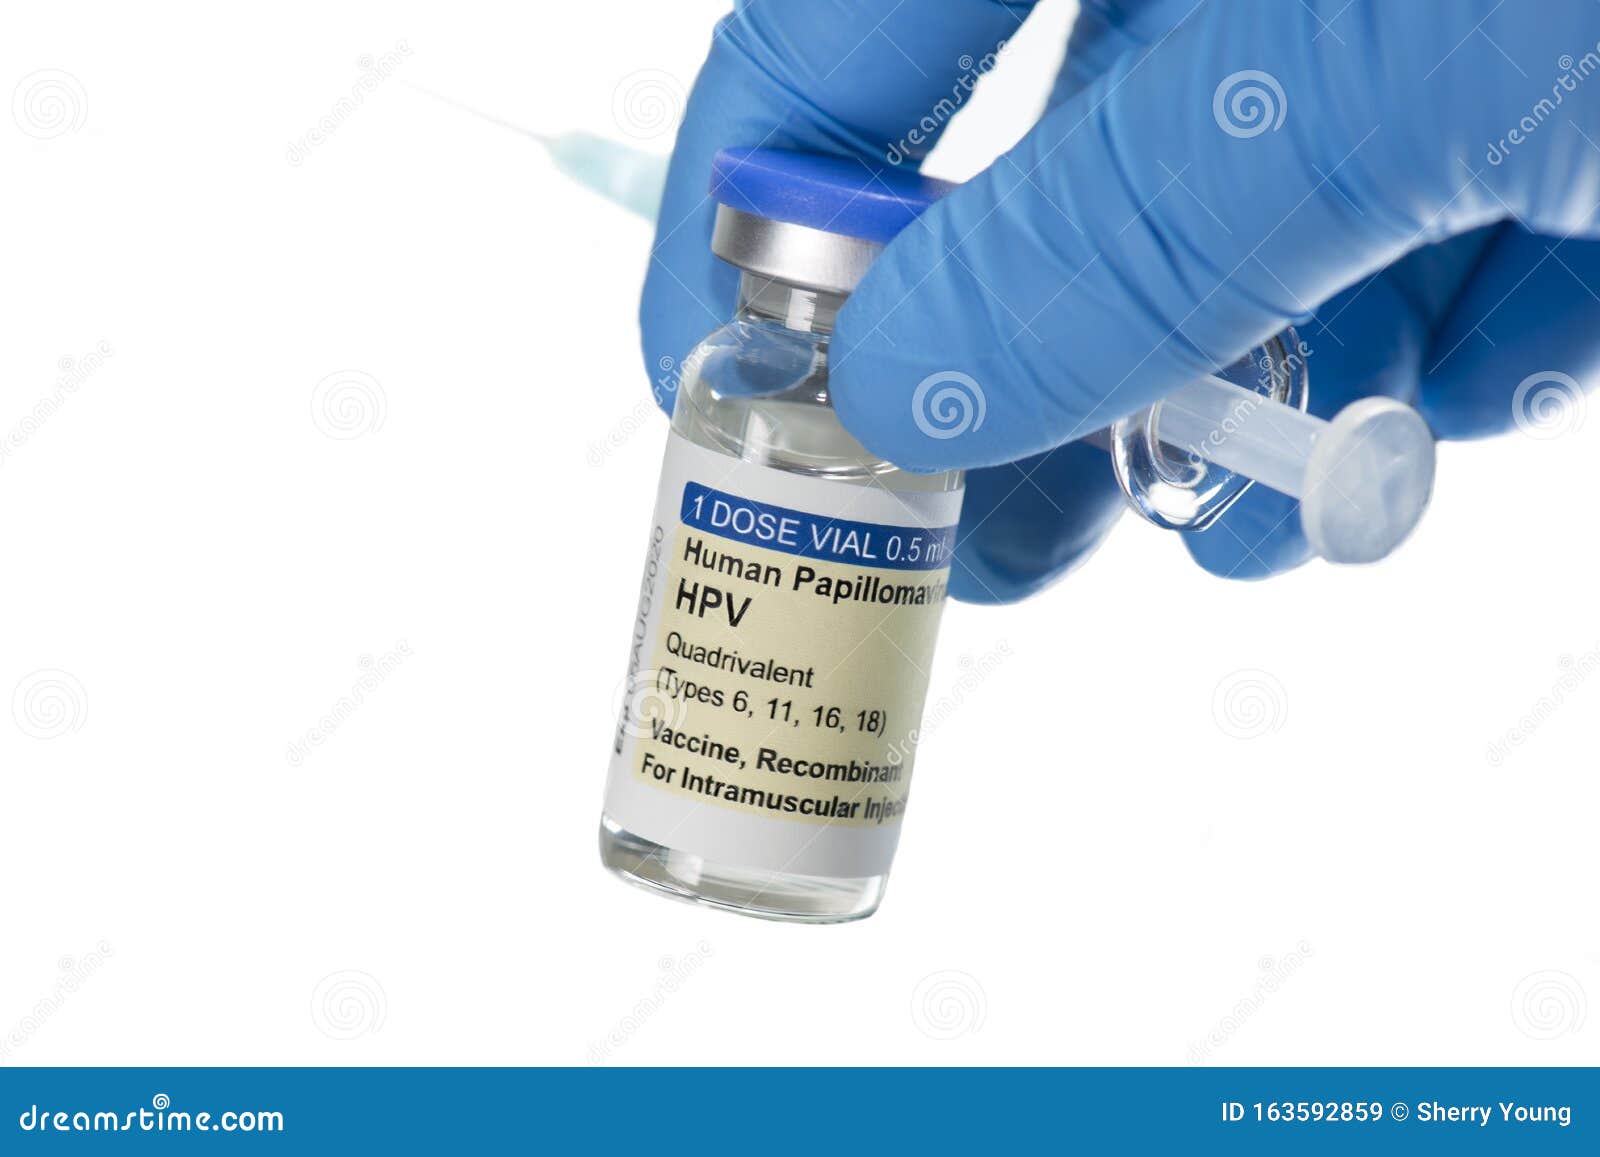 hpv vaccine and syringe